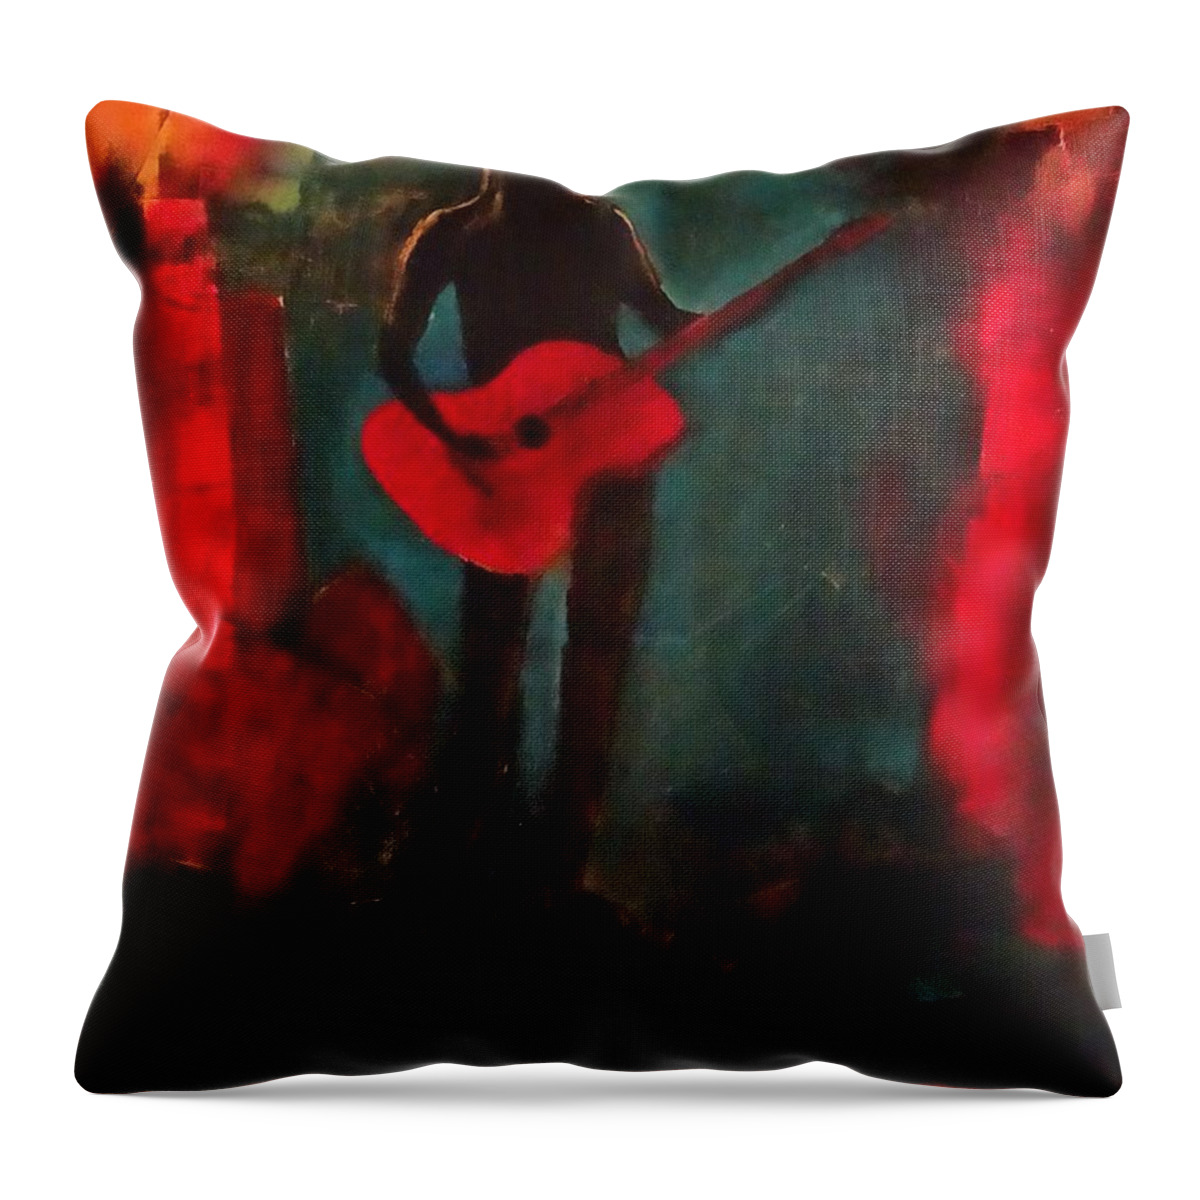 Musician Throw Pillow featuring the painting The Musician by Kat McClure